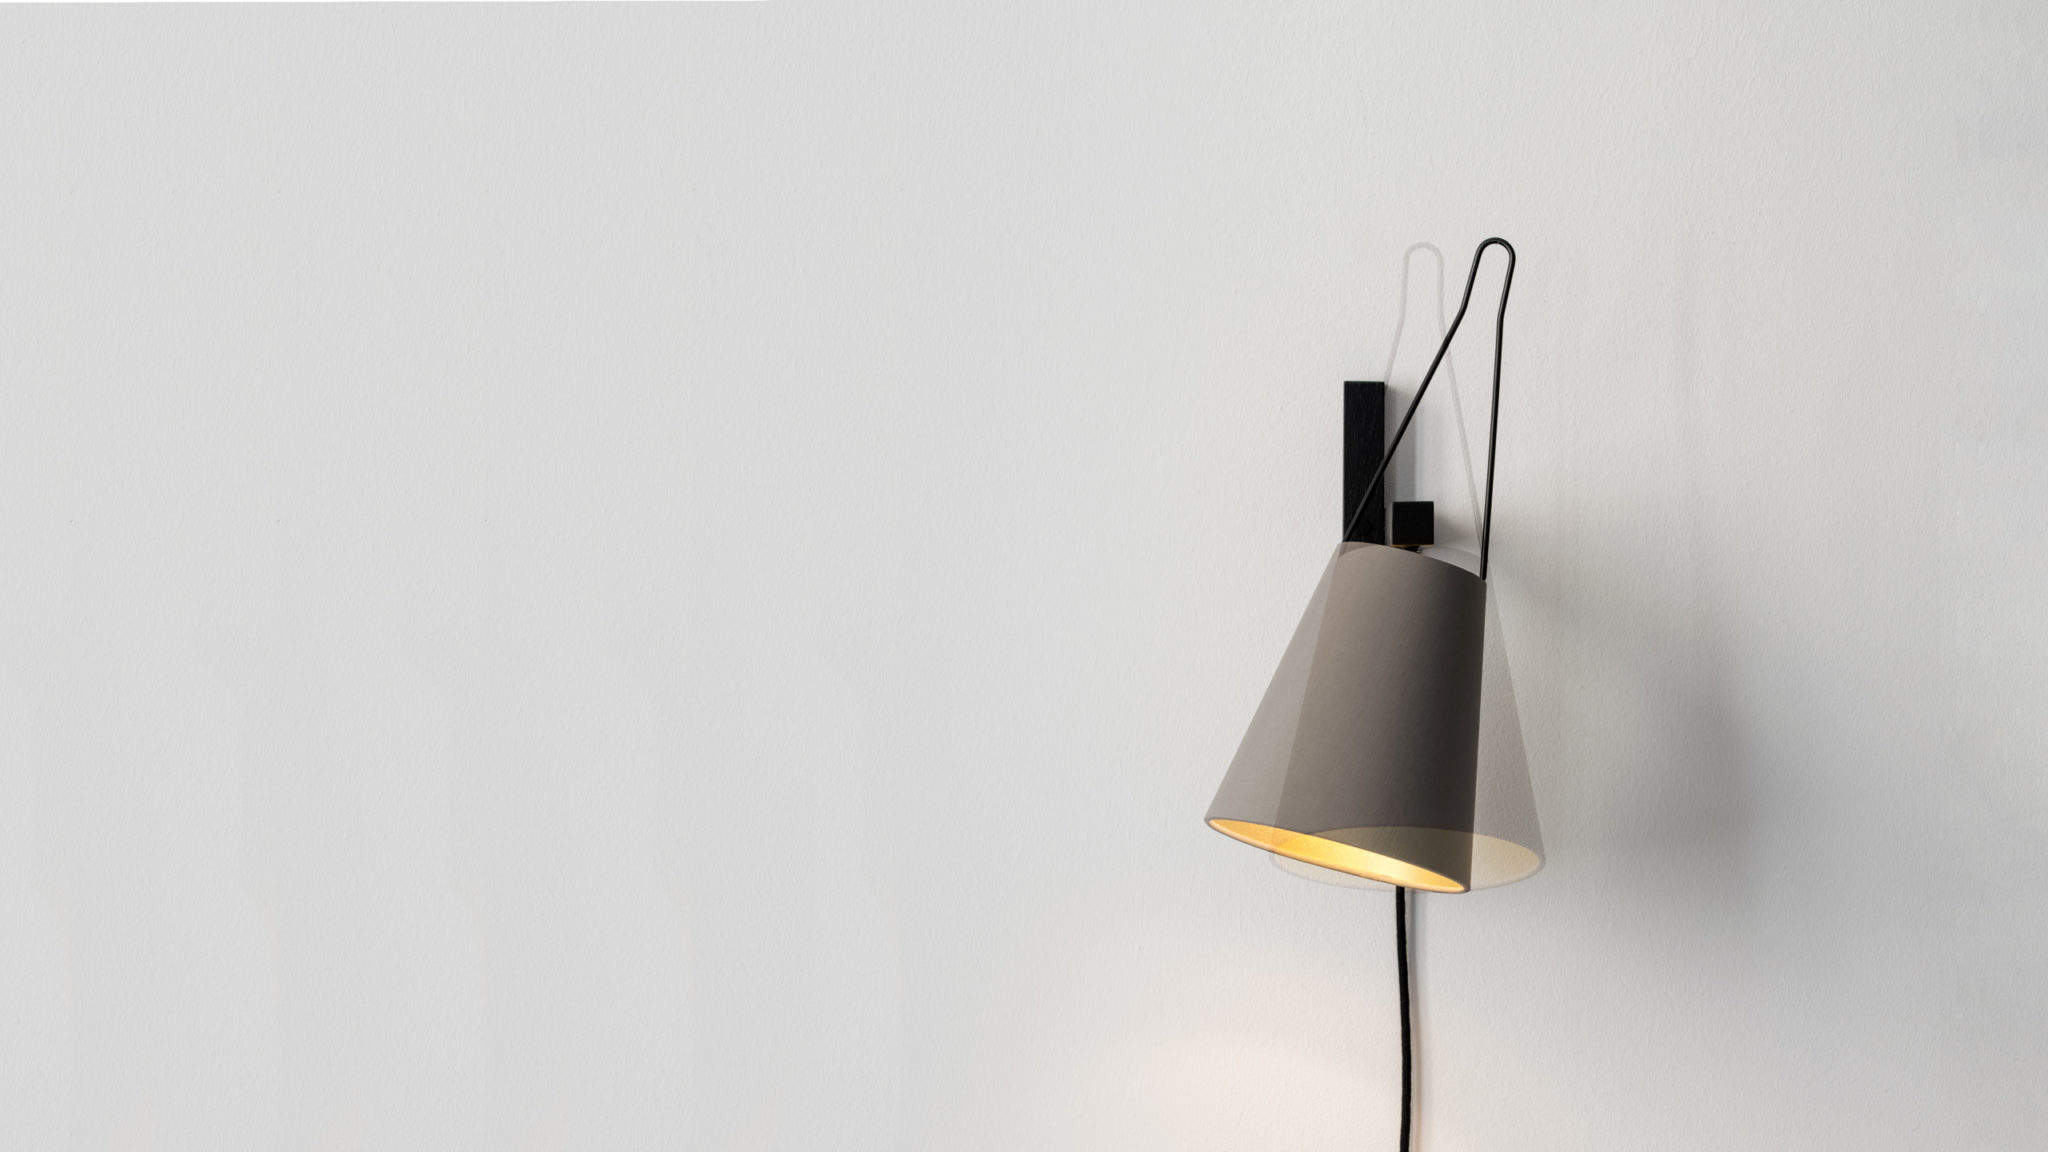 MINA wall lamp in chintz stone-grey and black wooden fitting.